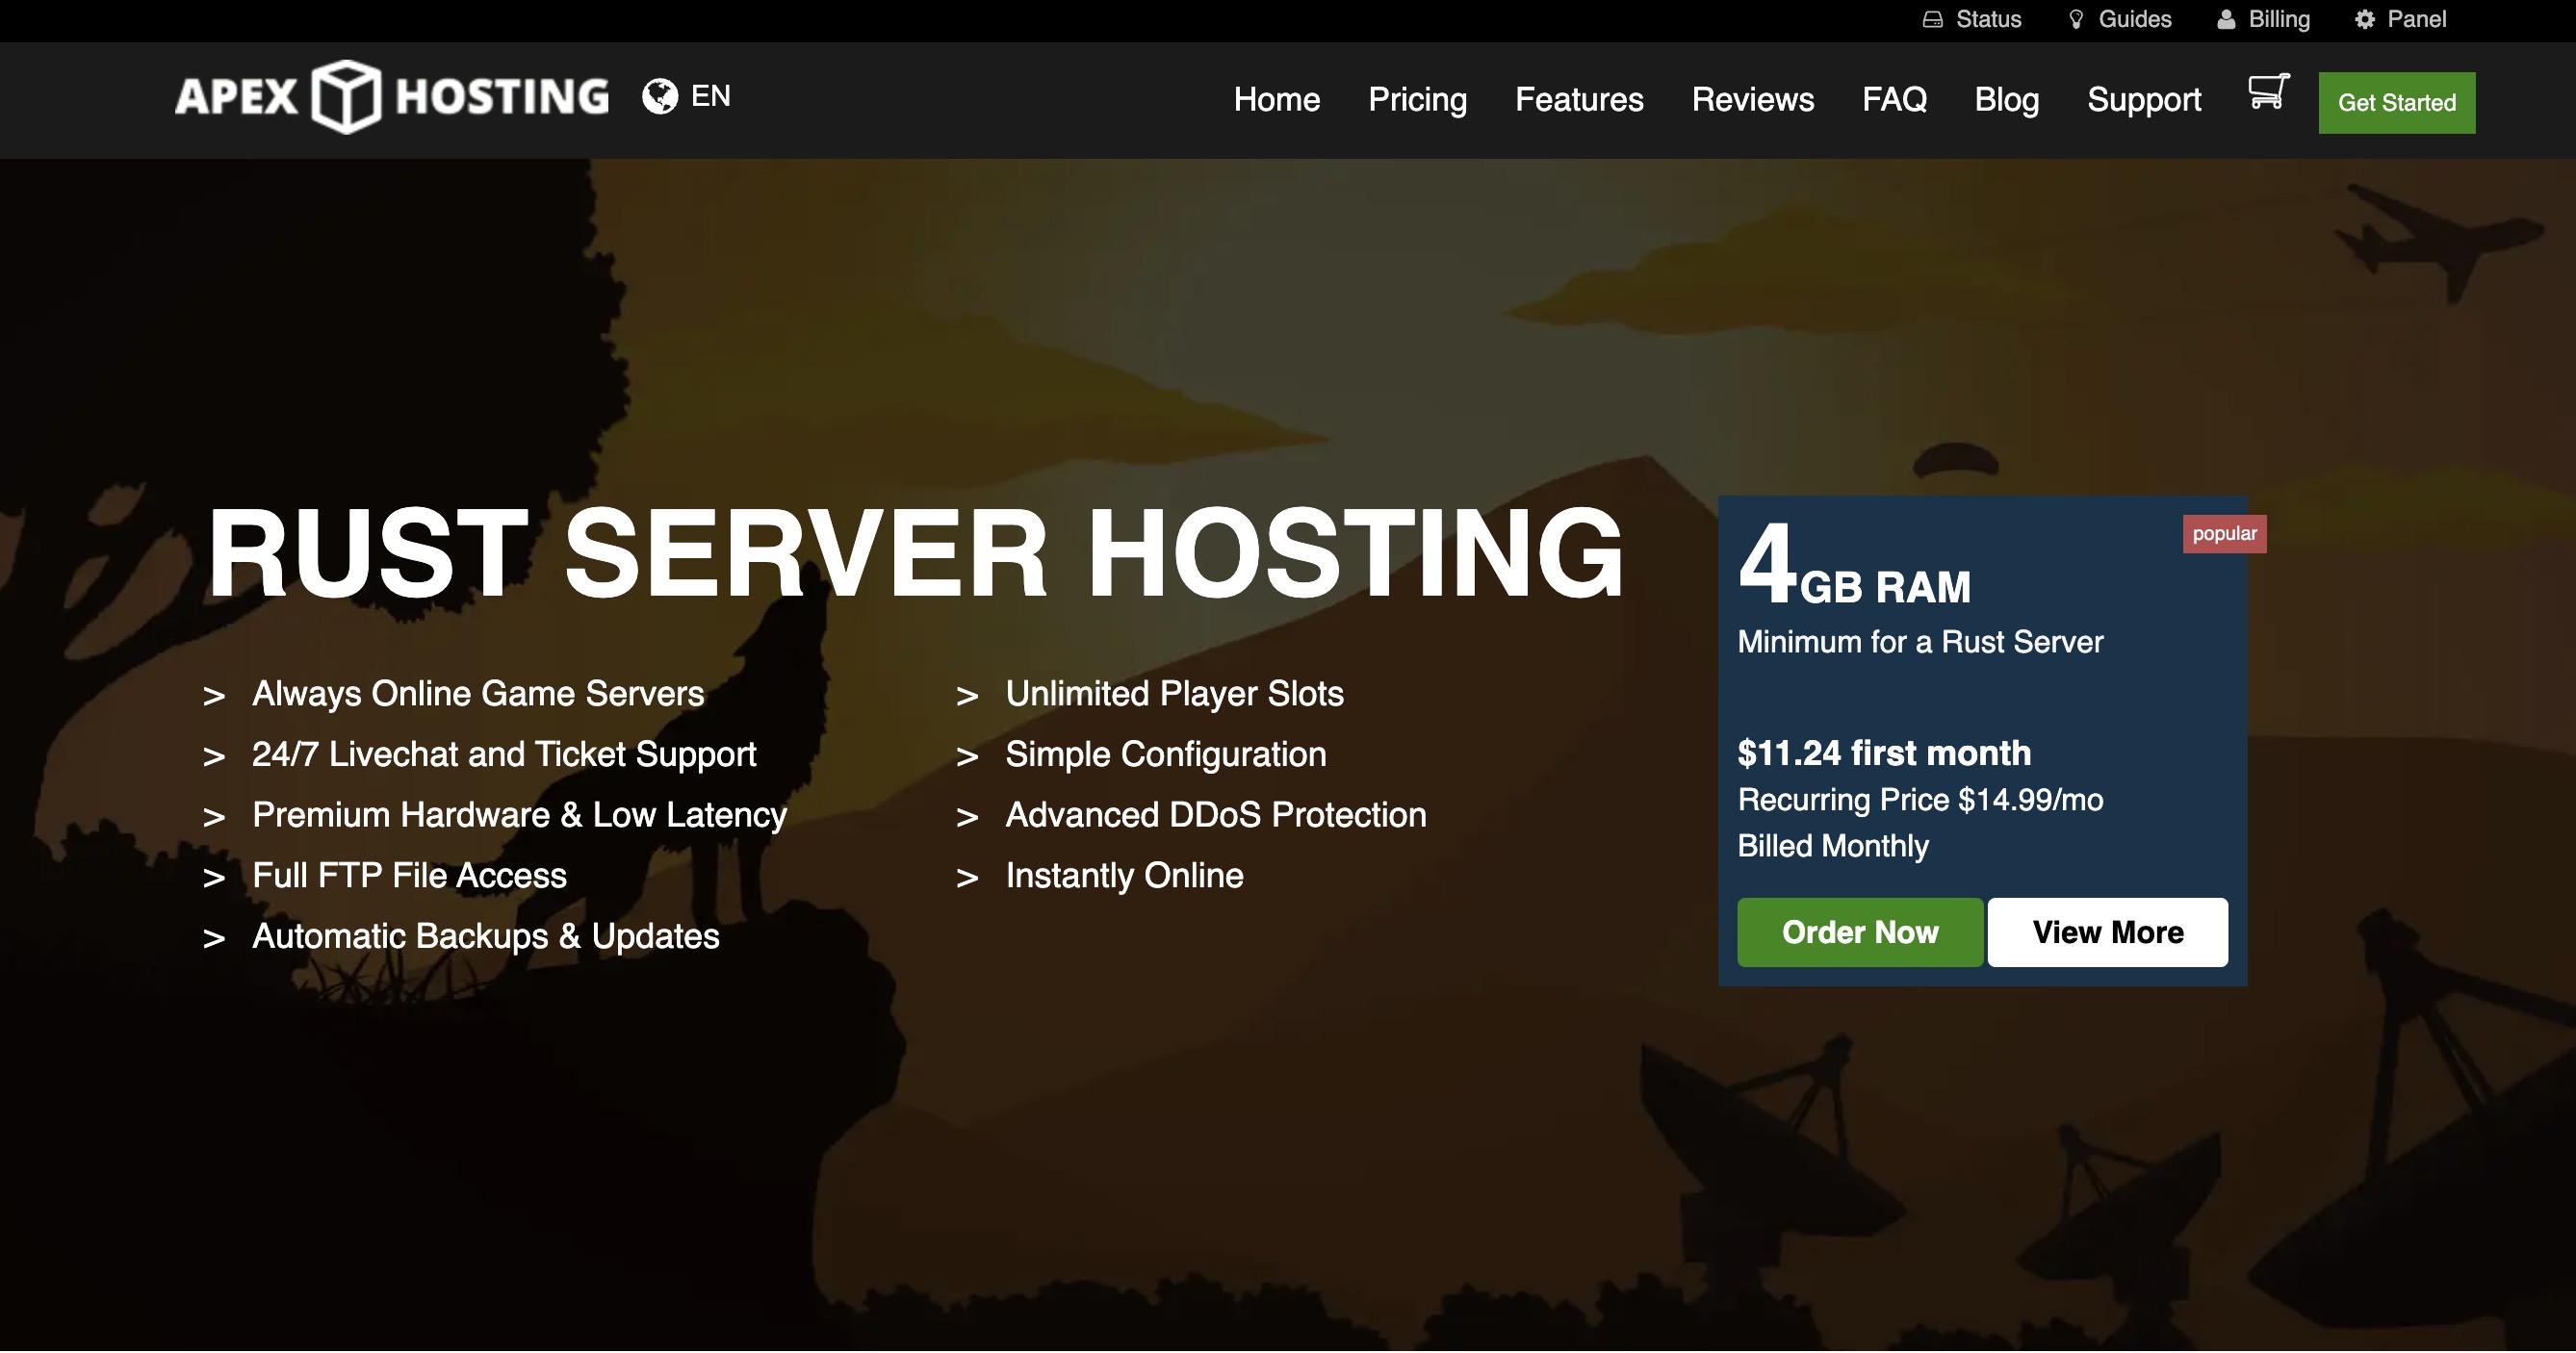 An imge of Apex Hosting's rust hosting page